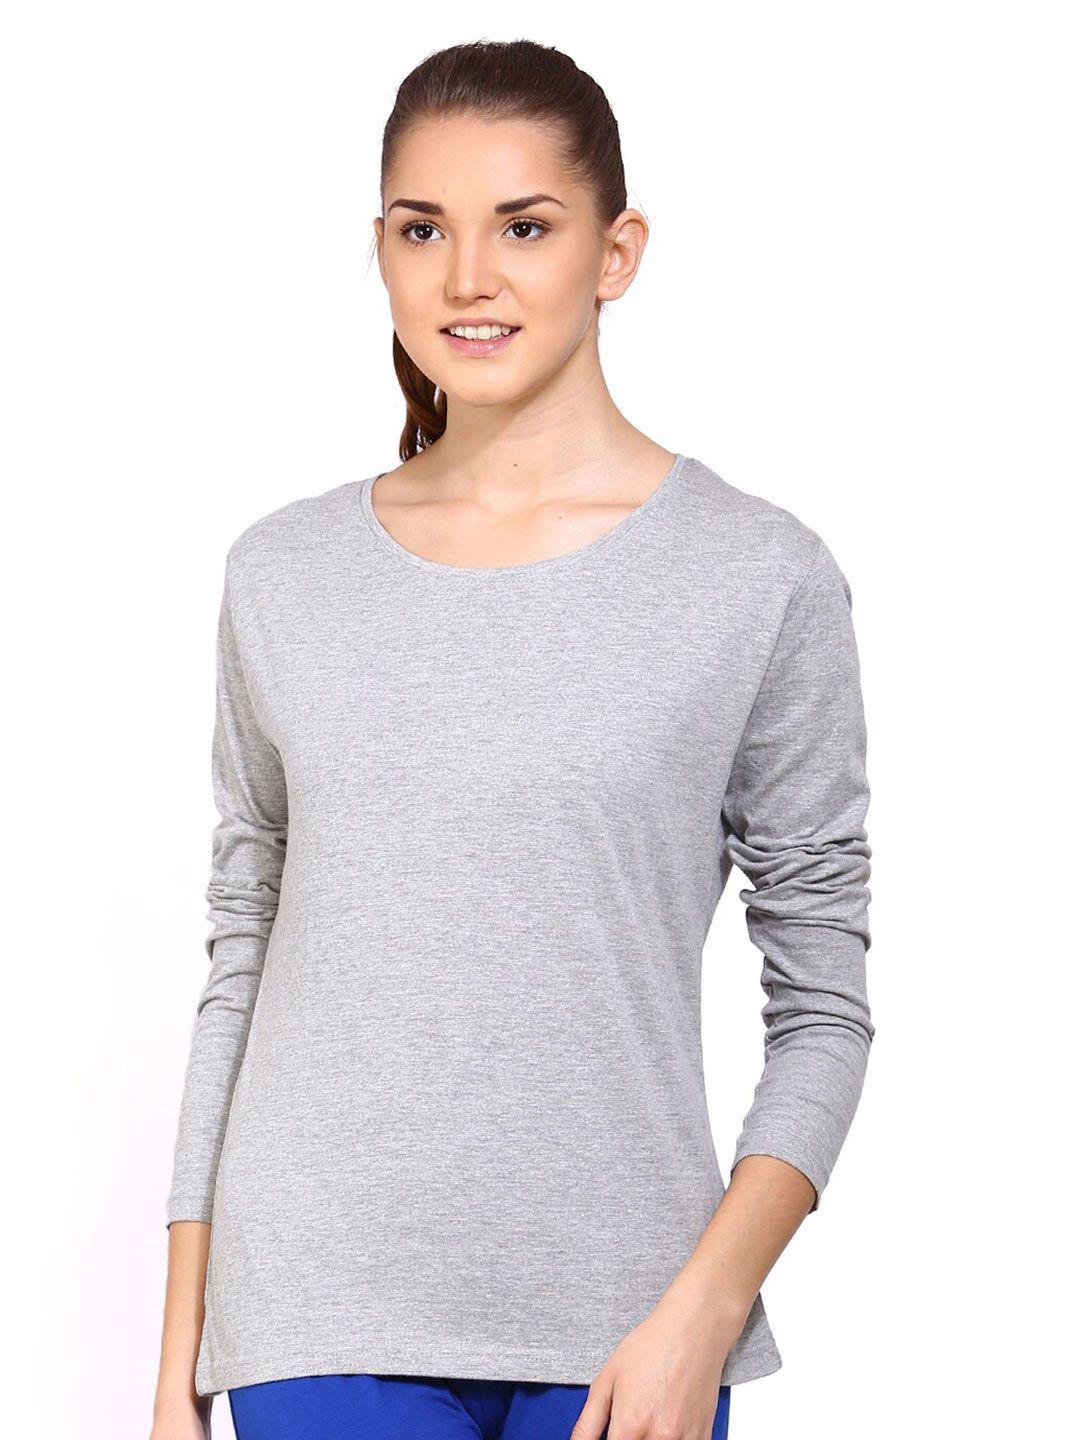 appulse Round Neck Long Sleeves Cotton T-shirt